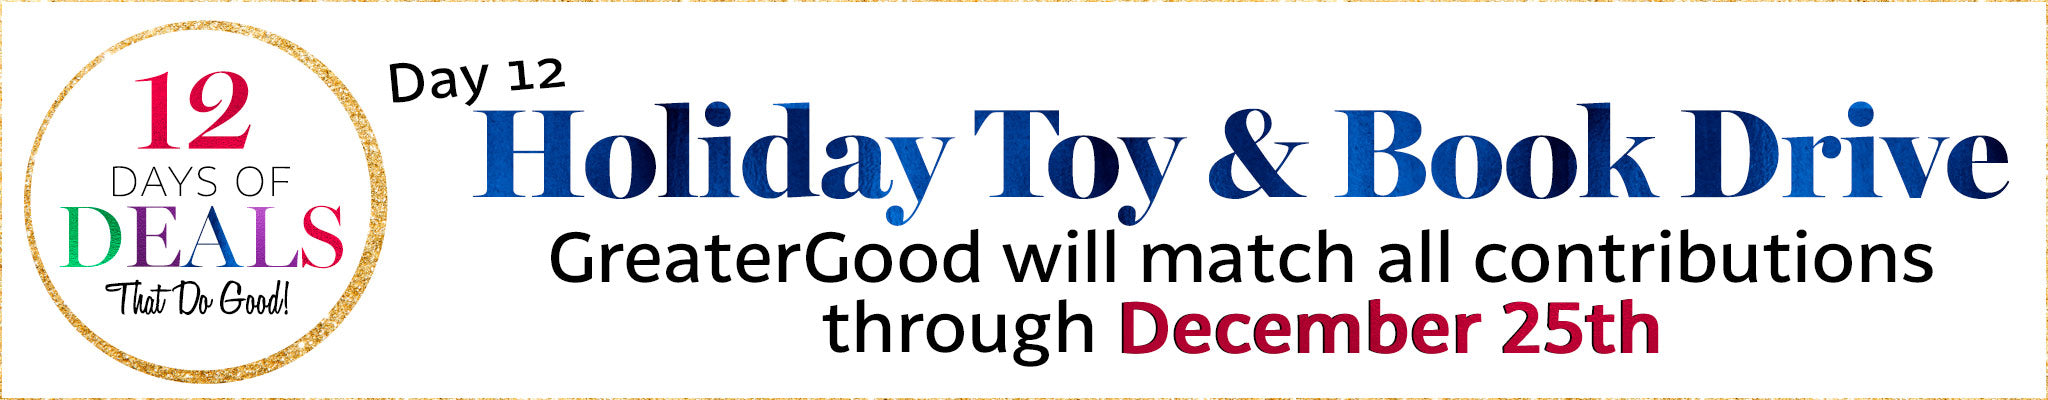 12 Days of Deals | Day 12 | Holiday Toy & Book Drive! | GreaterGood will match all contributions through the 25th